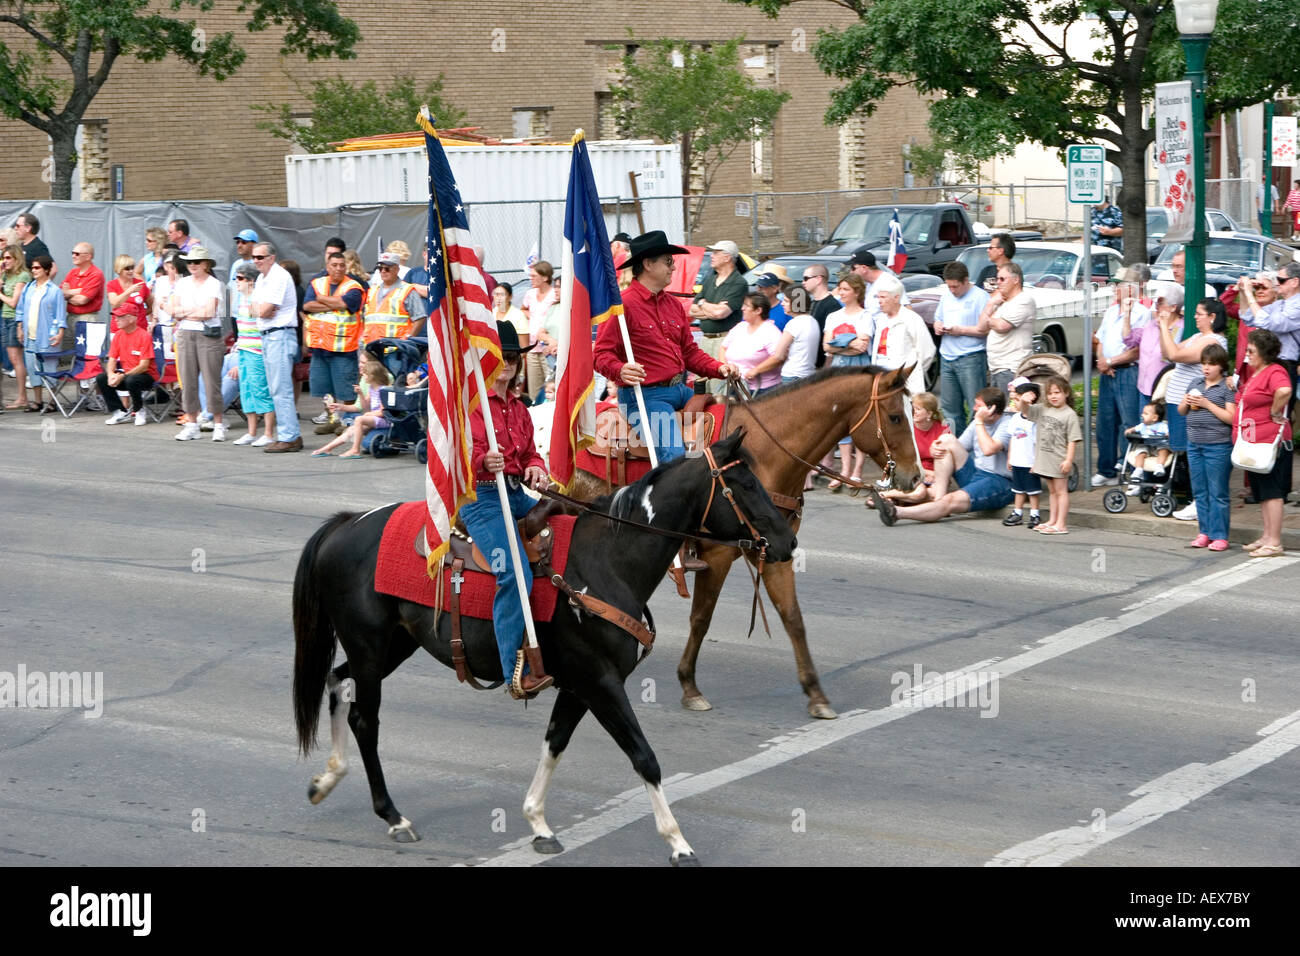 Horse mounted man and woman color guard in street festival parade Stock Photo